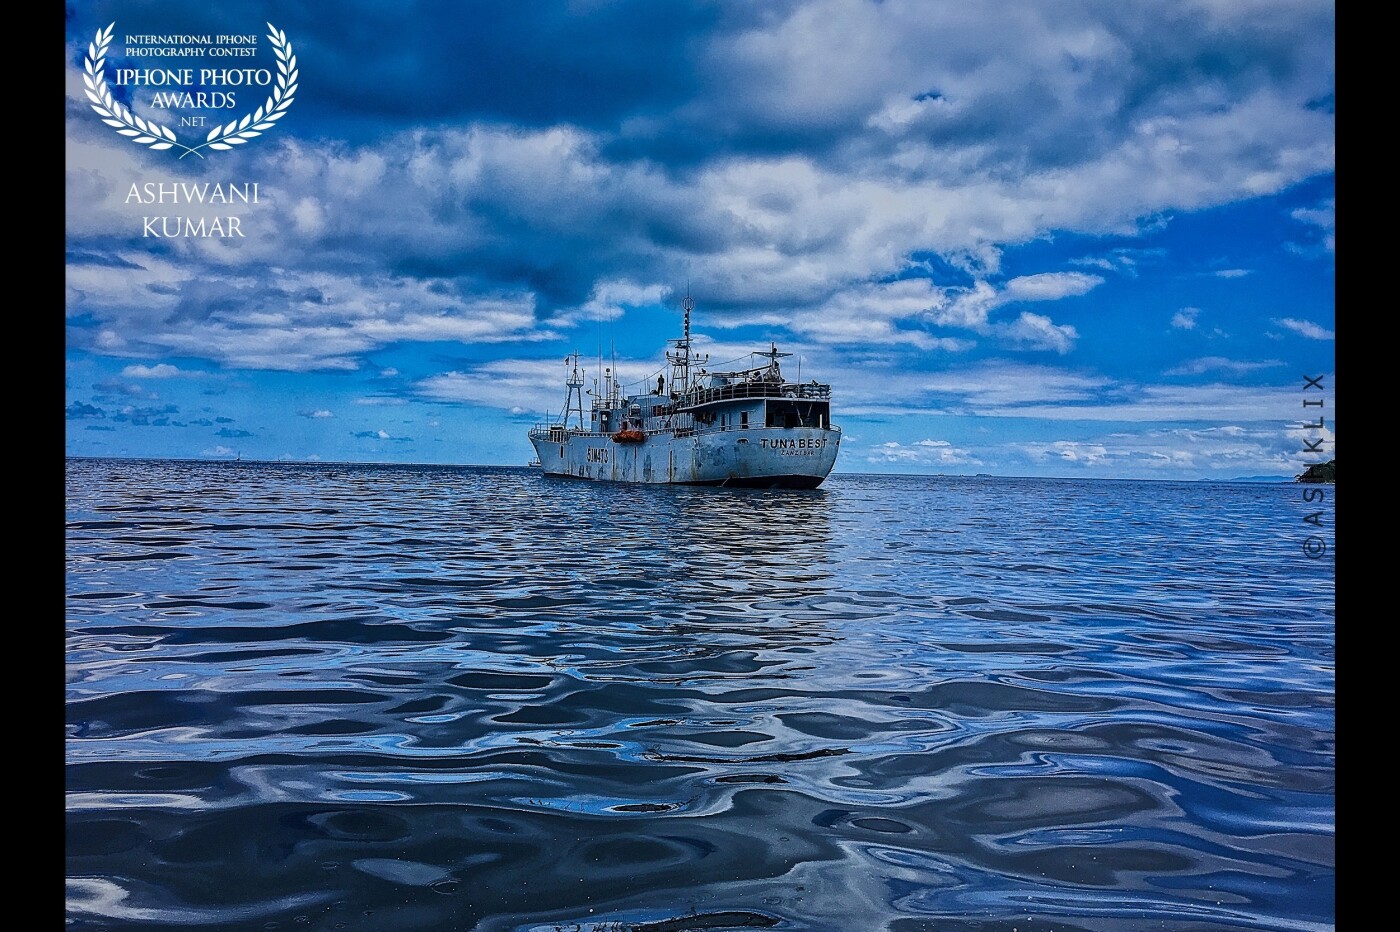 This picture was taken in a small boat during my vacation in Seychelles & I just had my iPhone with me, so I framed the shot very carefully as I wanted to take the shot going close to the water also capturing the cloudy skies & this lone ship. Loved the overall blue feel to this & tried to edit in the same format.